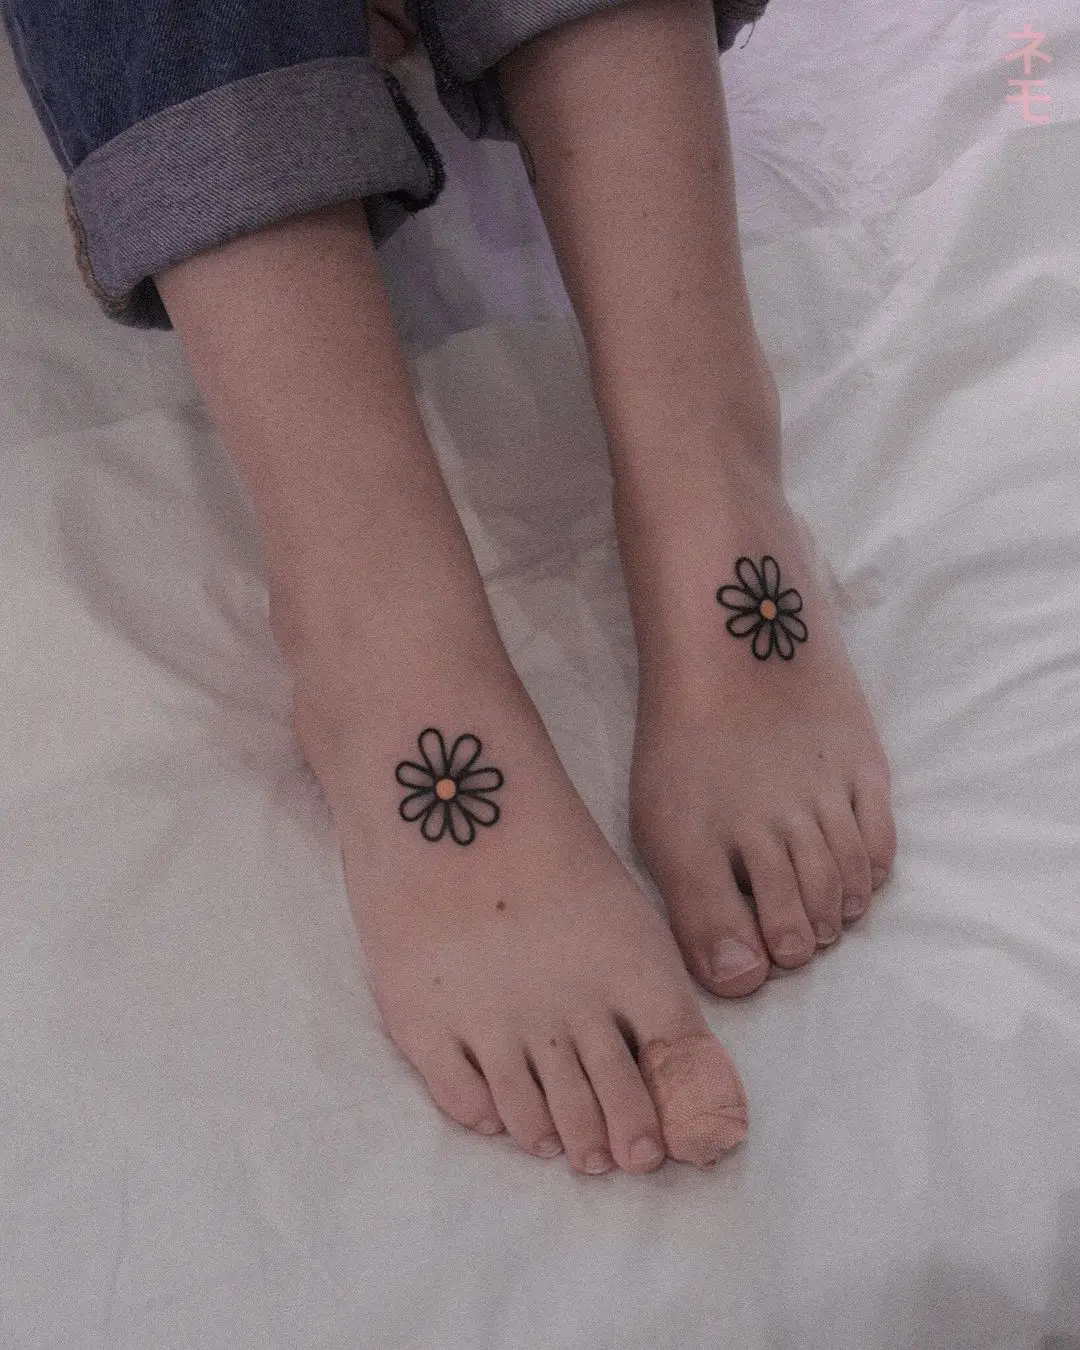 cute feet tattoo for women by anotheryearofdisaster